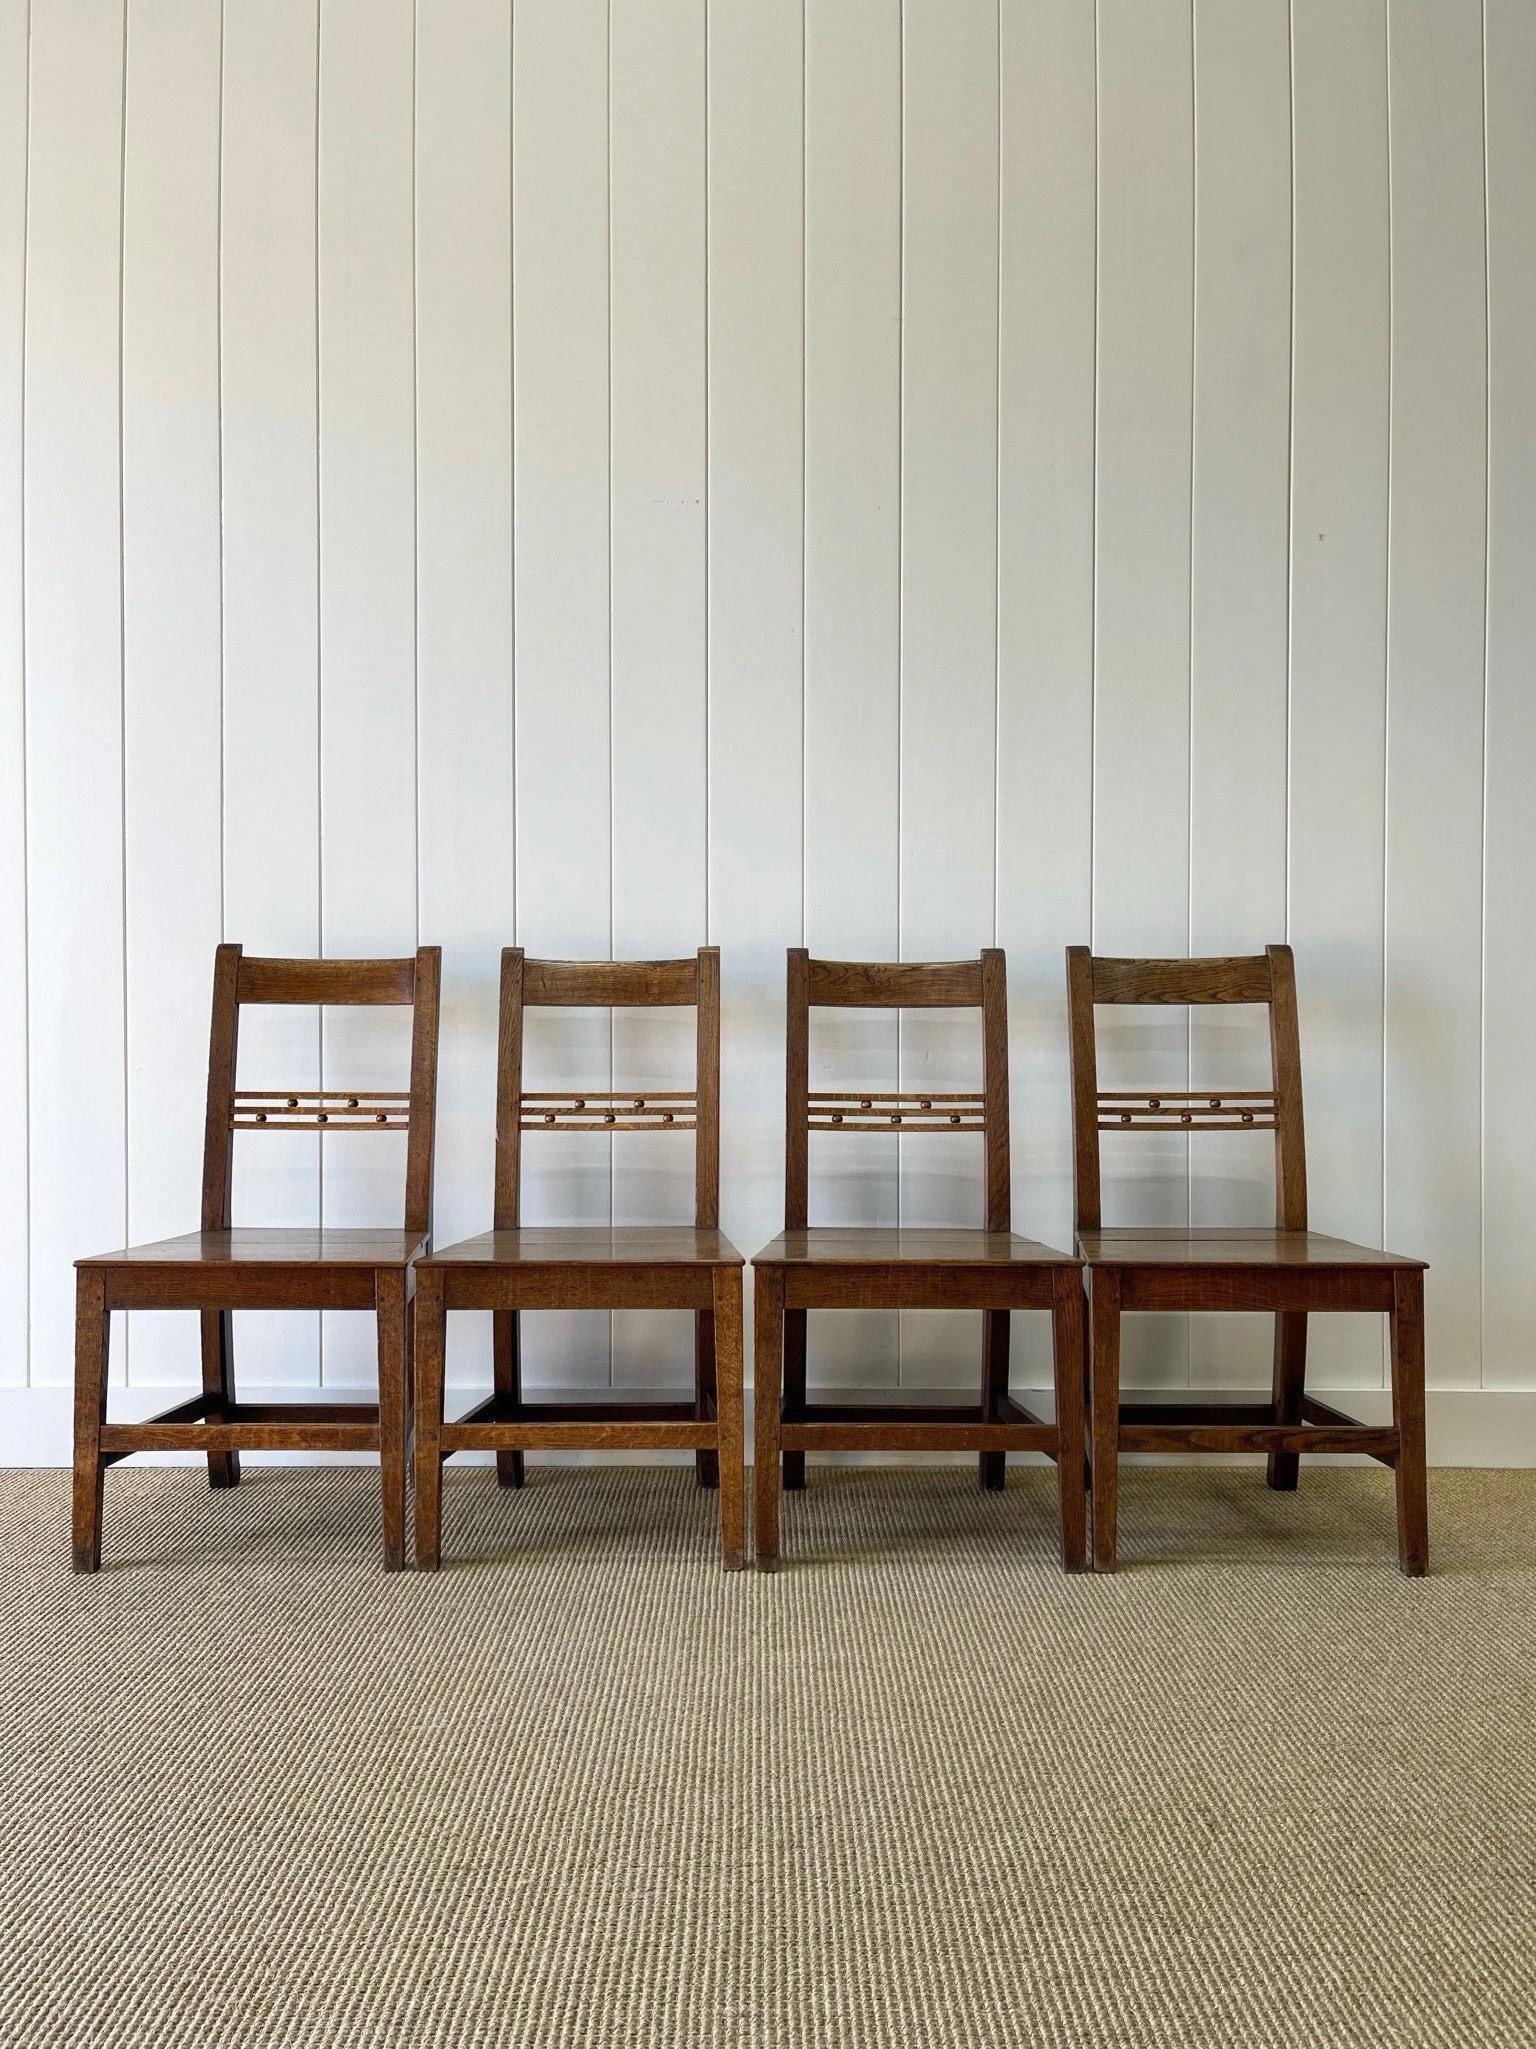 A delightful set of 4 English oak side chairs with solid seats. Lovely dark finish with good grain. Made of oak and elm. Stretchers add support. Playful orbs decorate the back splat. These are solid chairs, but should not be 